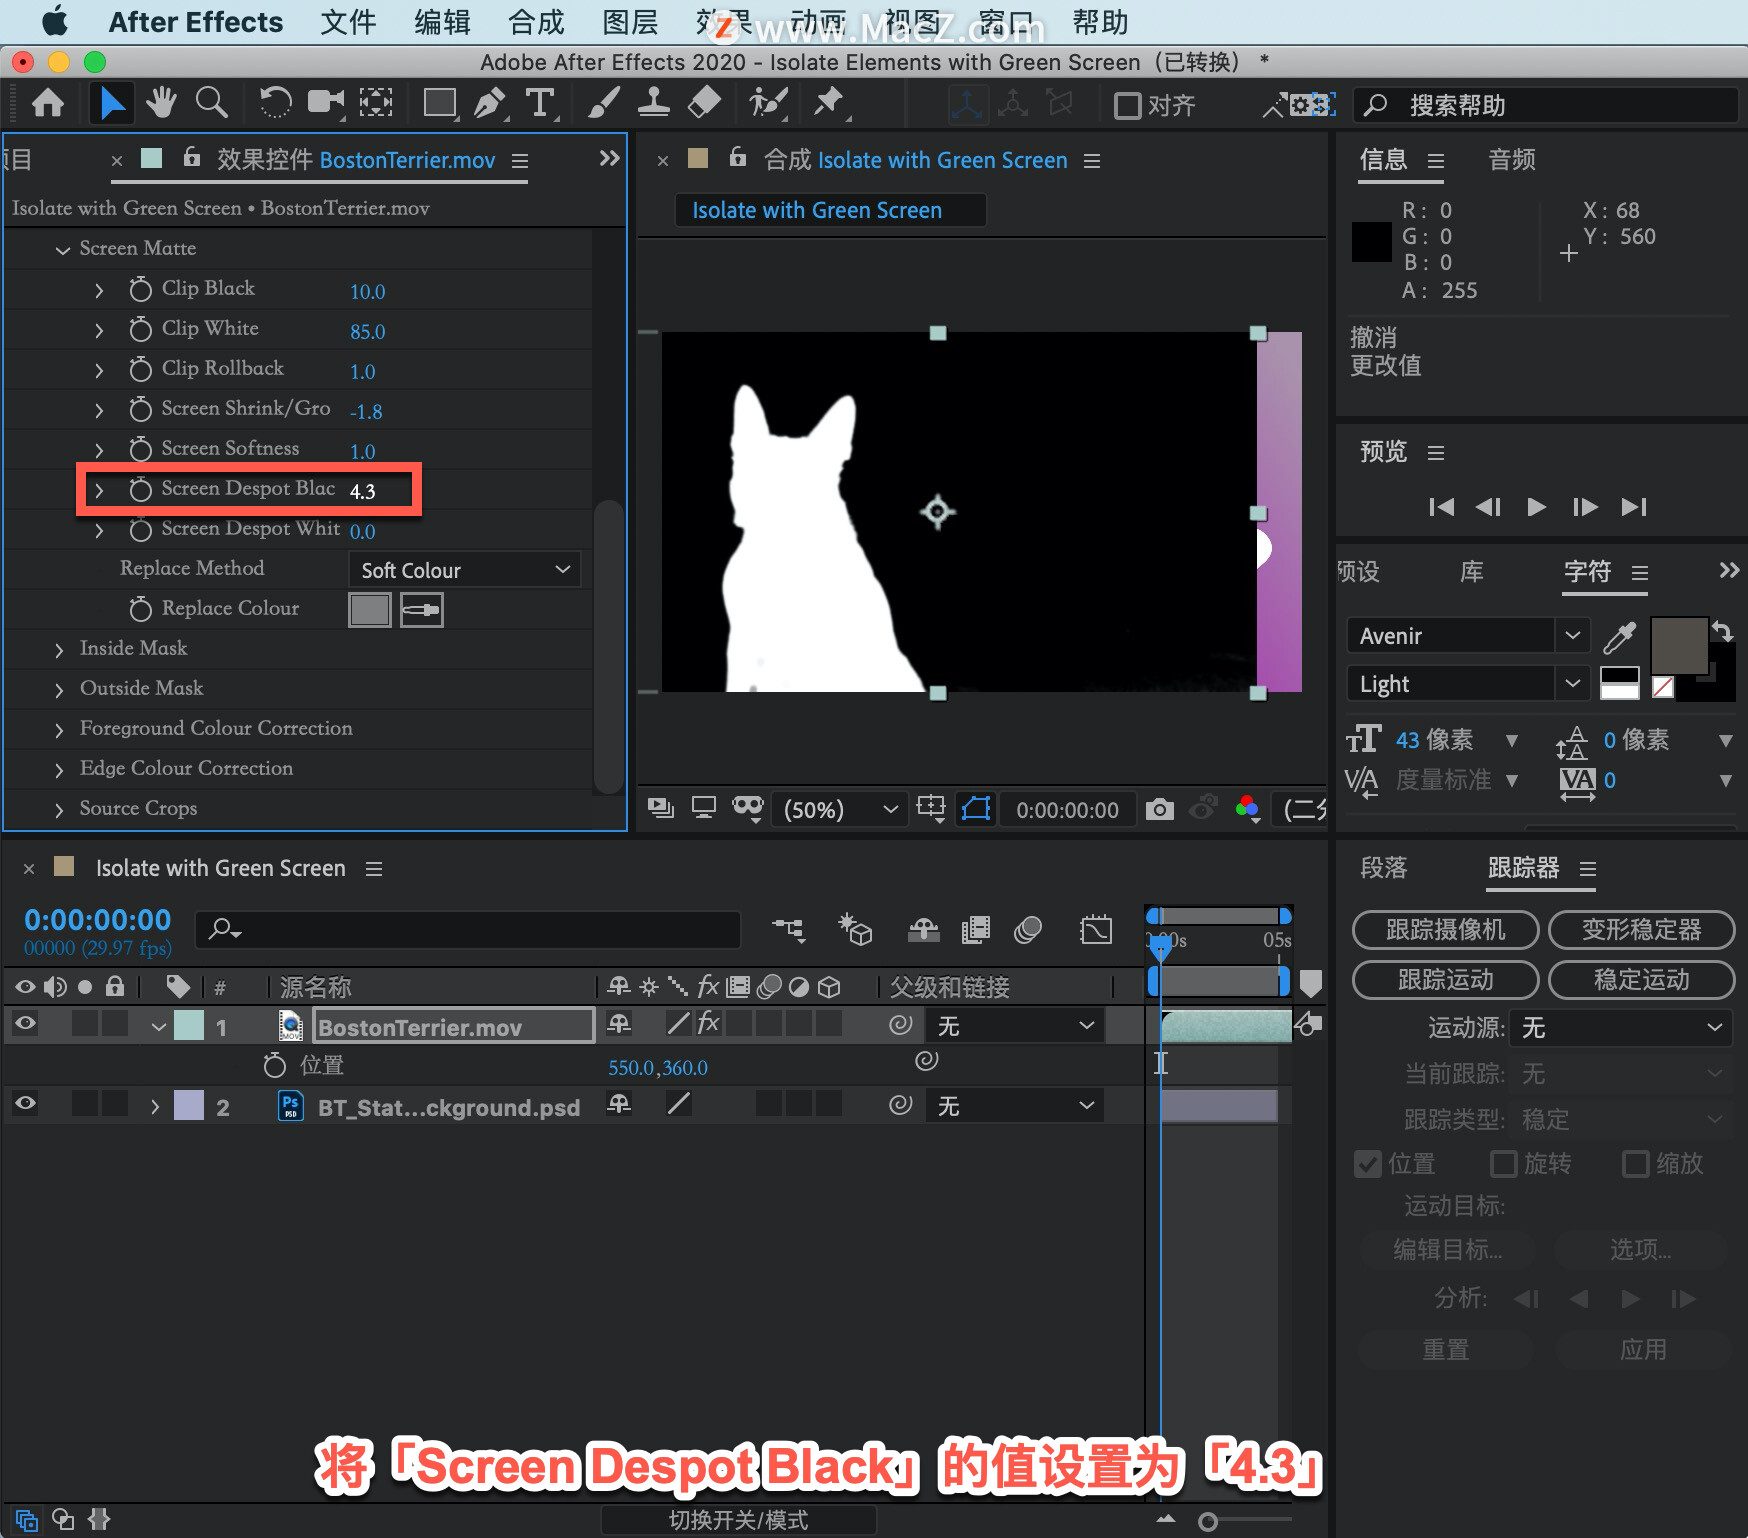 After Effects 教程「36」，如何在 After Effects 中创建透明度？